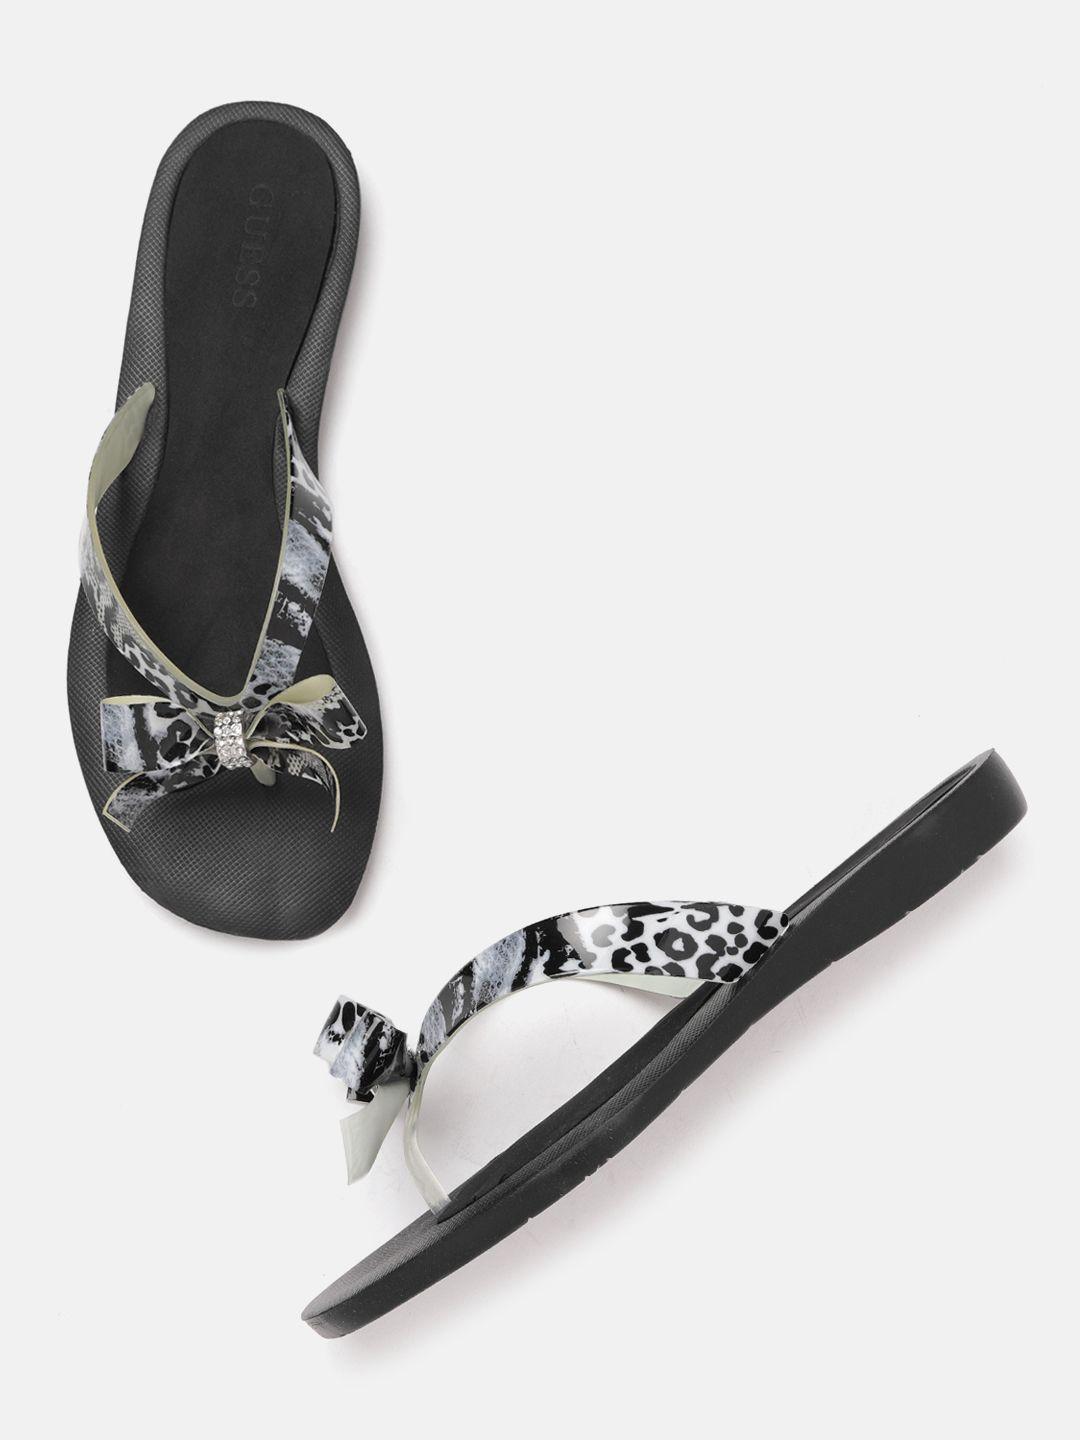 guess women black snake printed open toe flats with bow detail